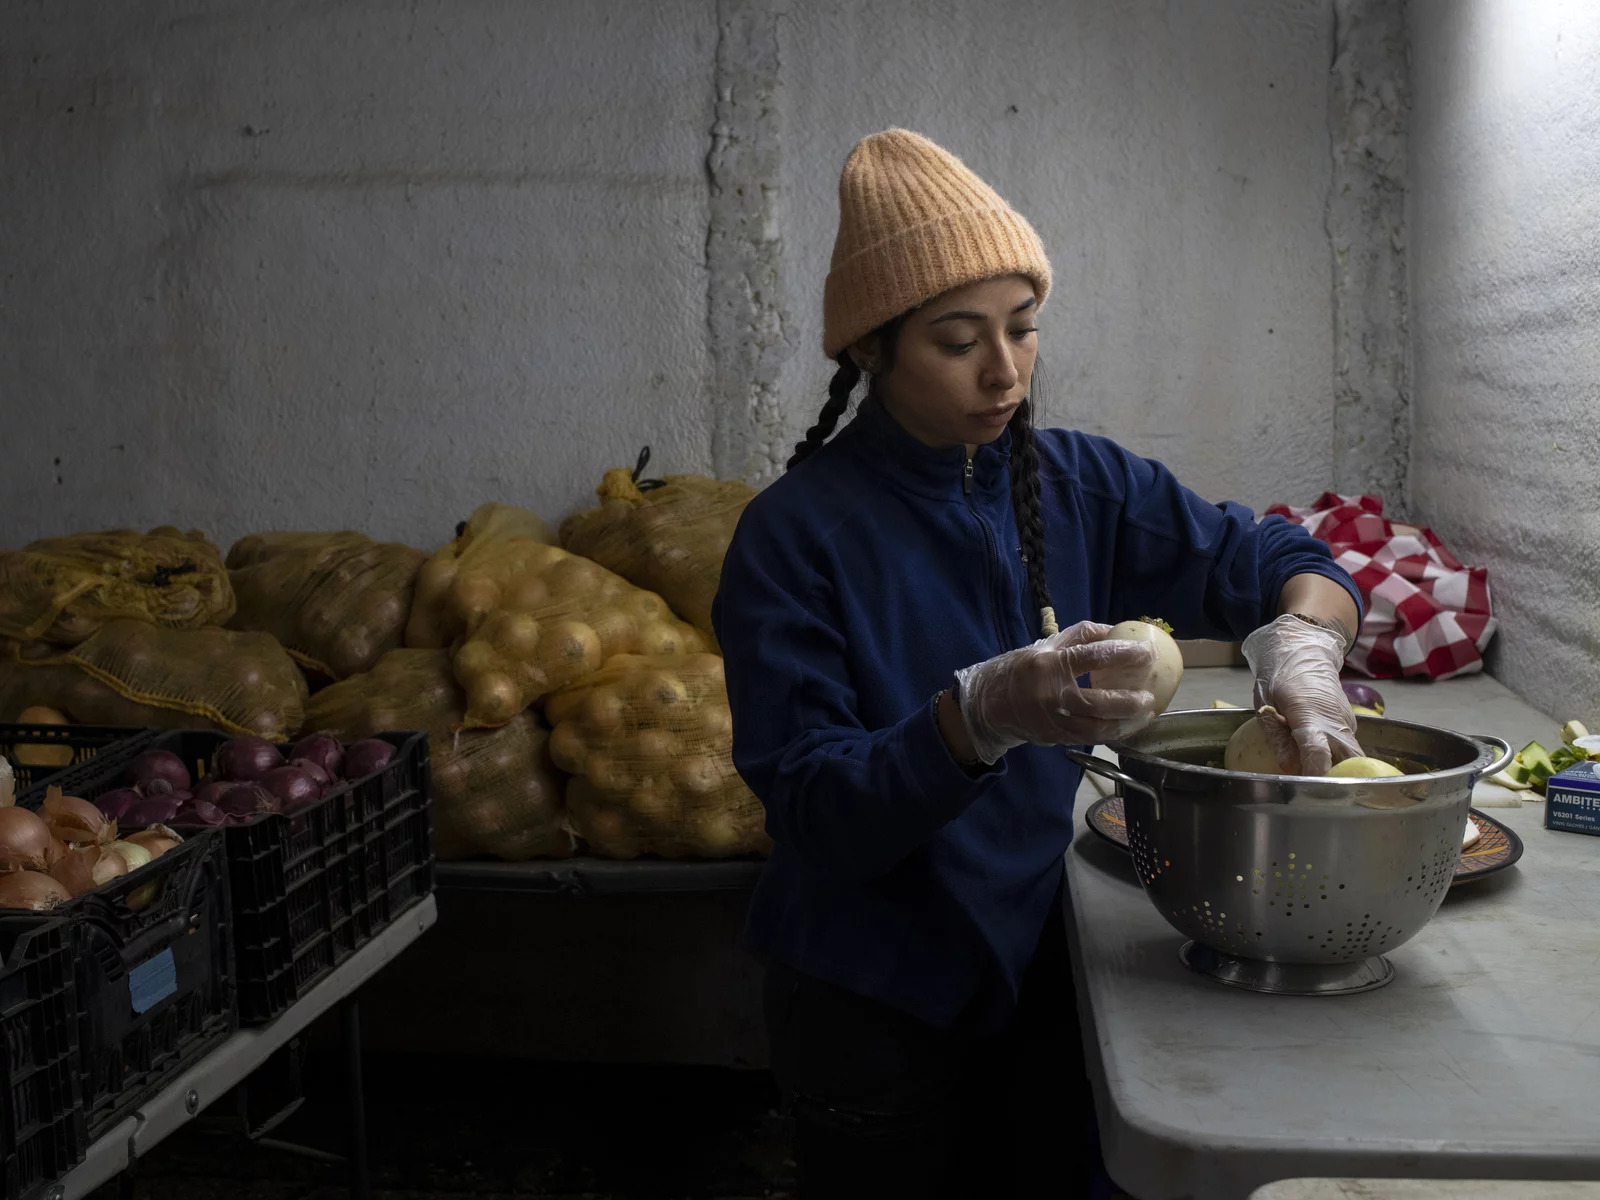 Woman putting produce in a metal bowl